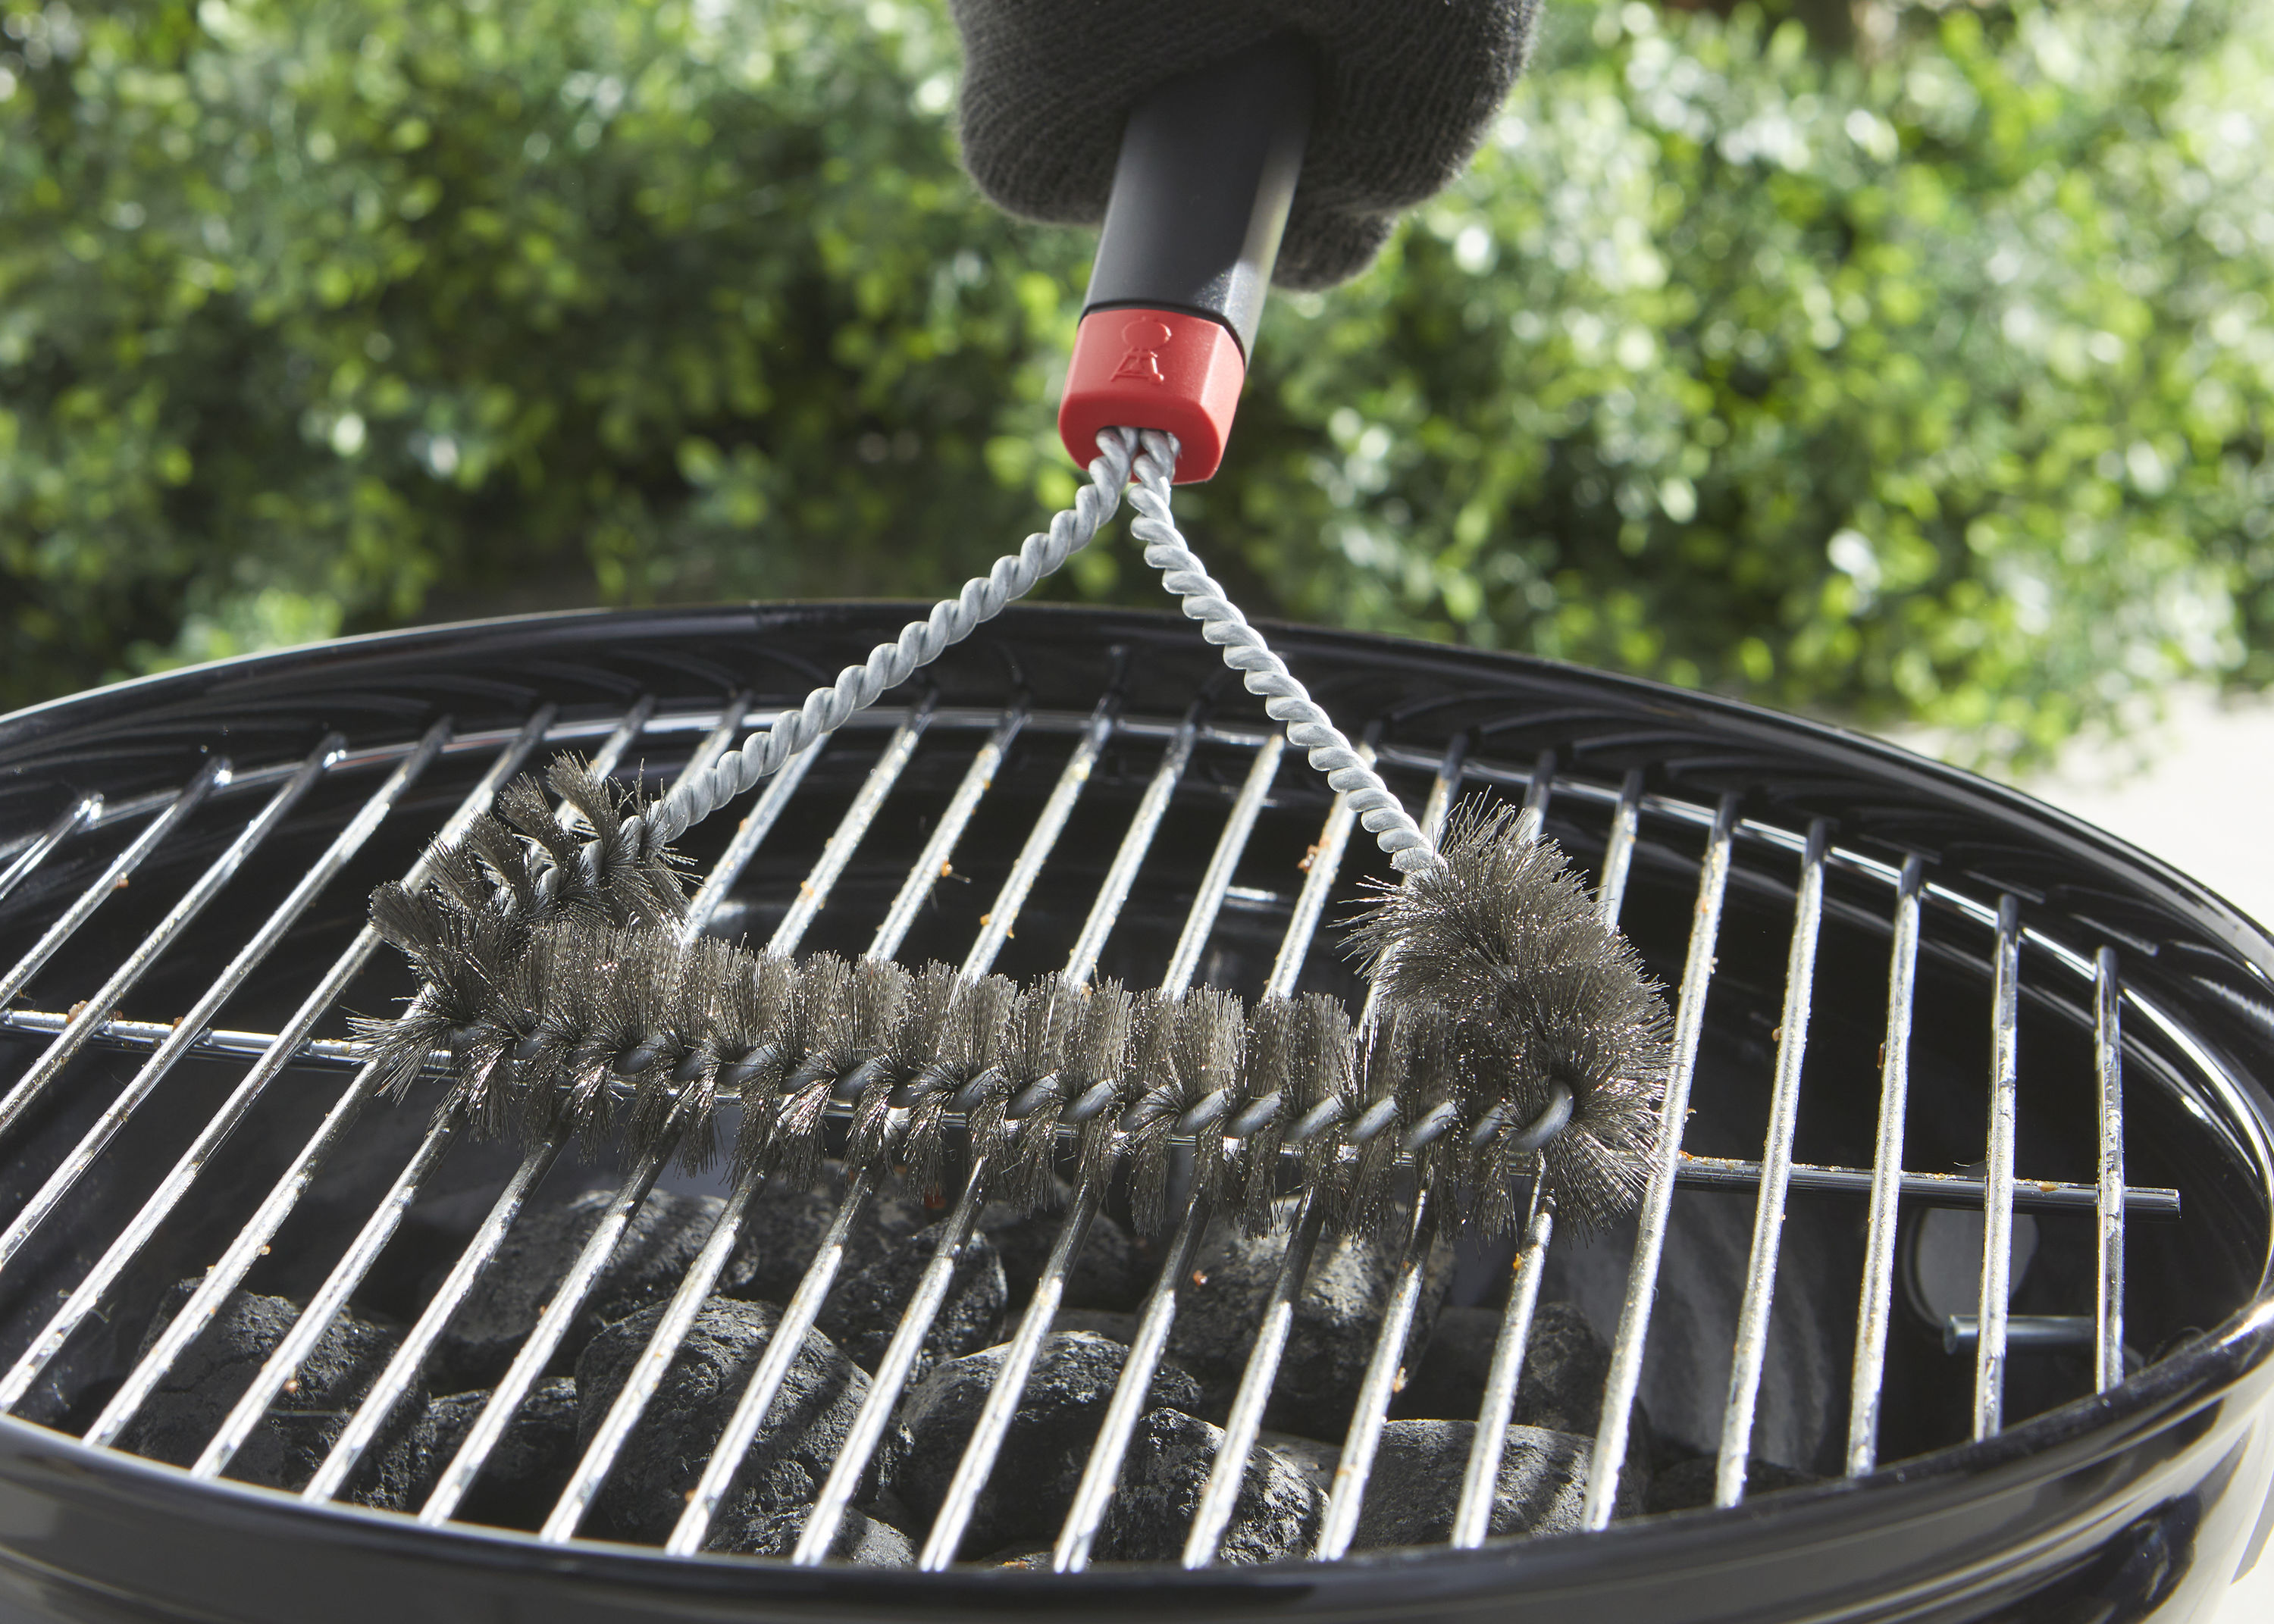 Weber Grill Brush in the Grill Brushes & Cleaning Blocks department at